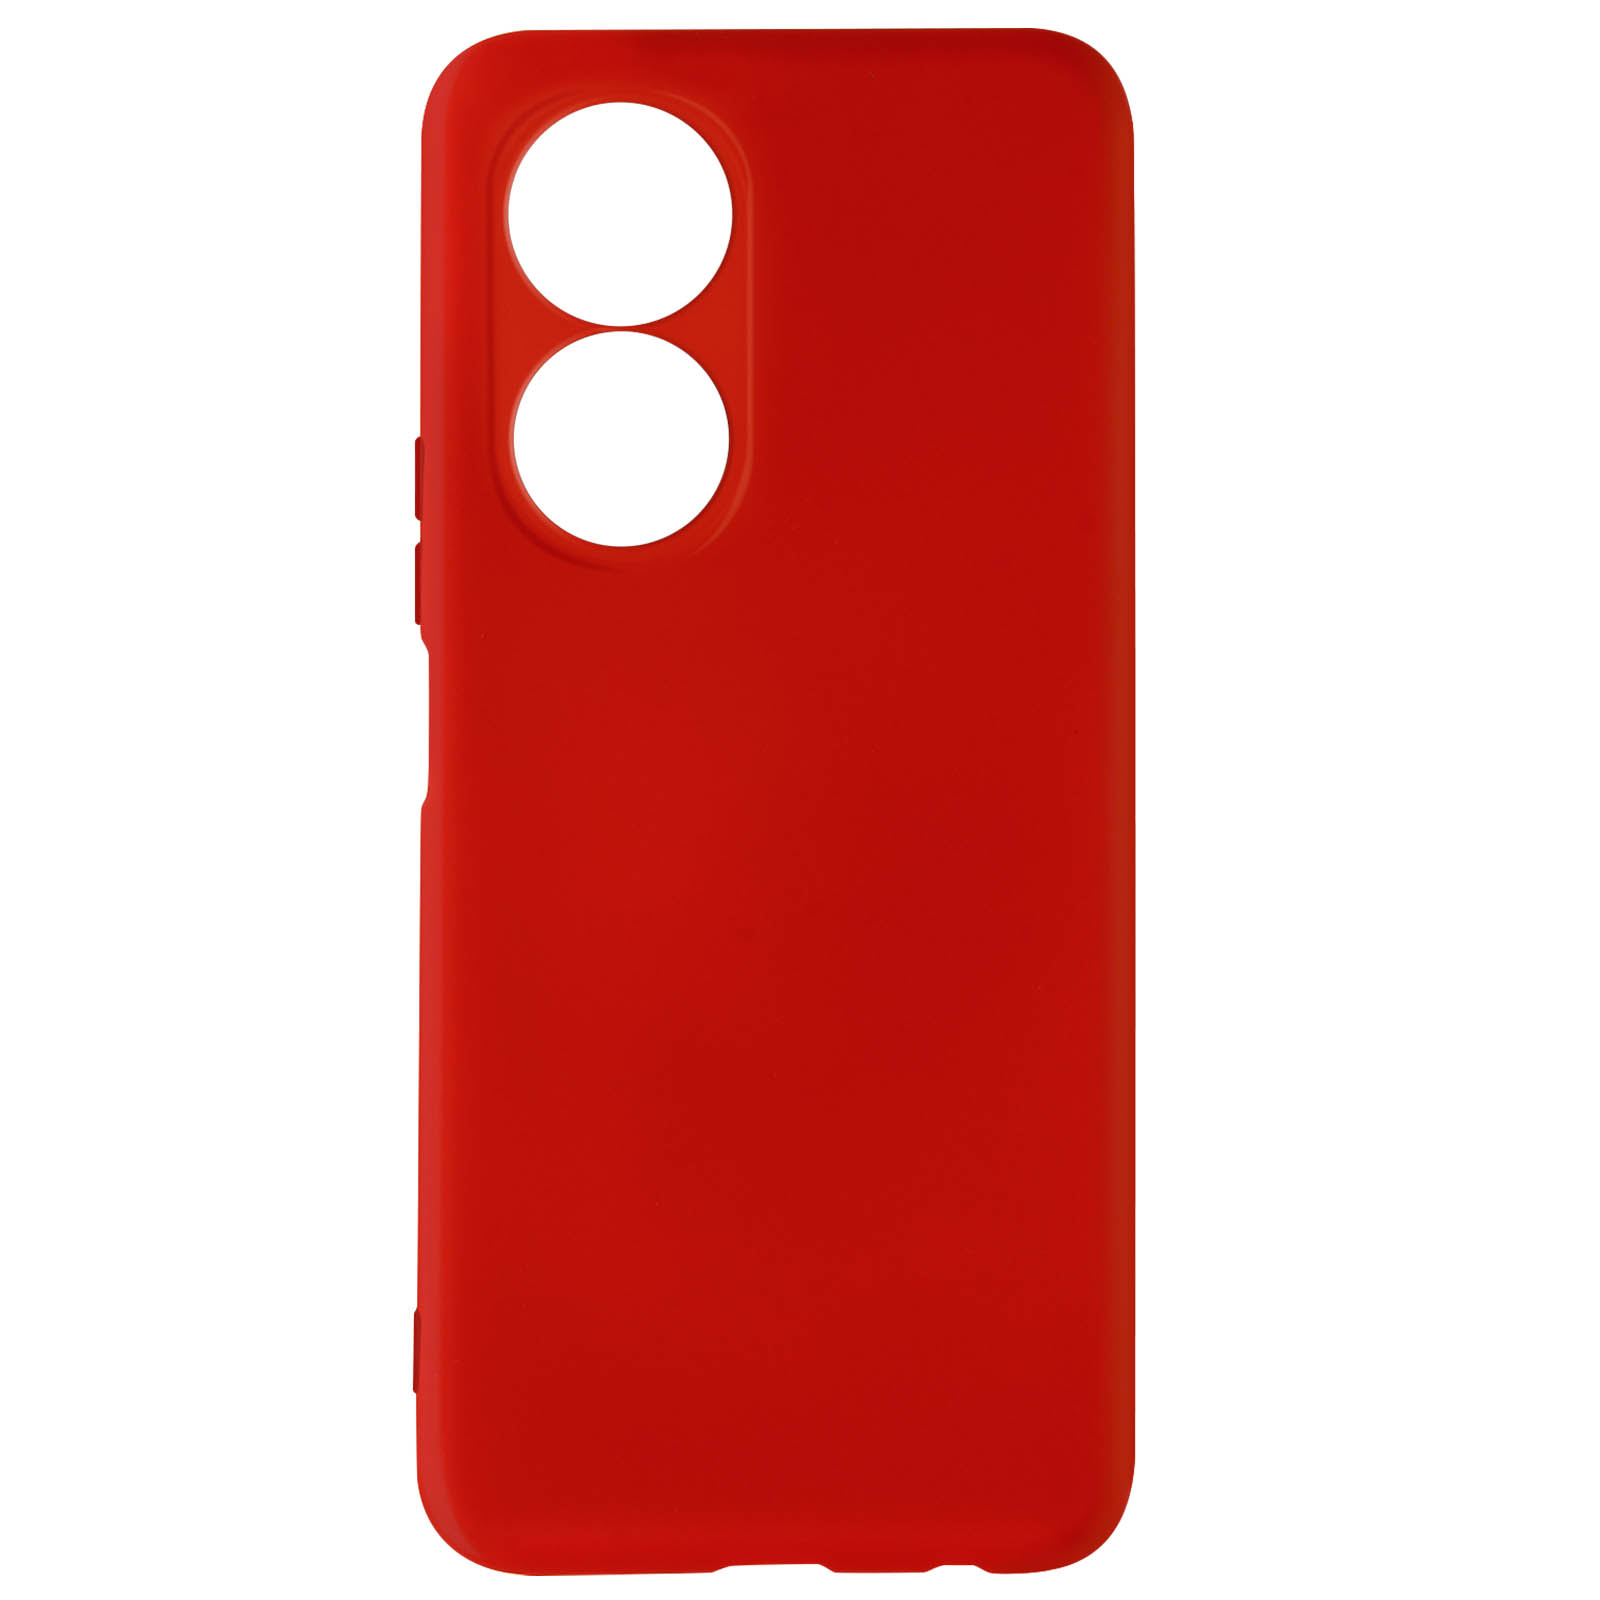 AVIZAR Soft Honor, X7, Touch Series, Honor Rot Backcover